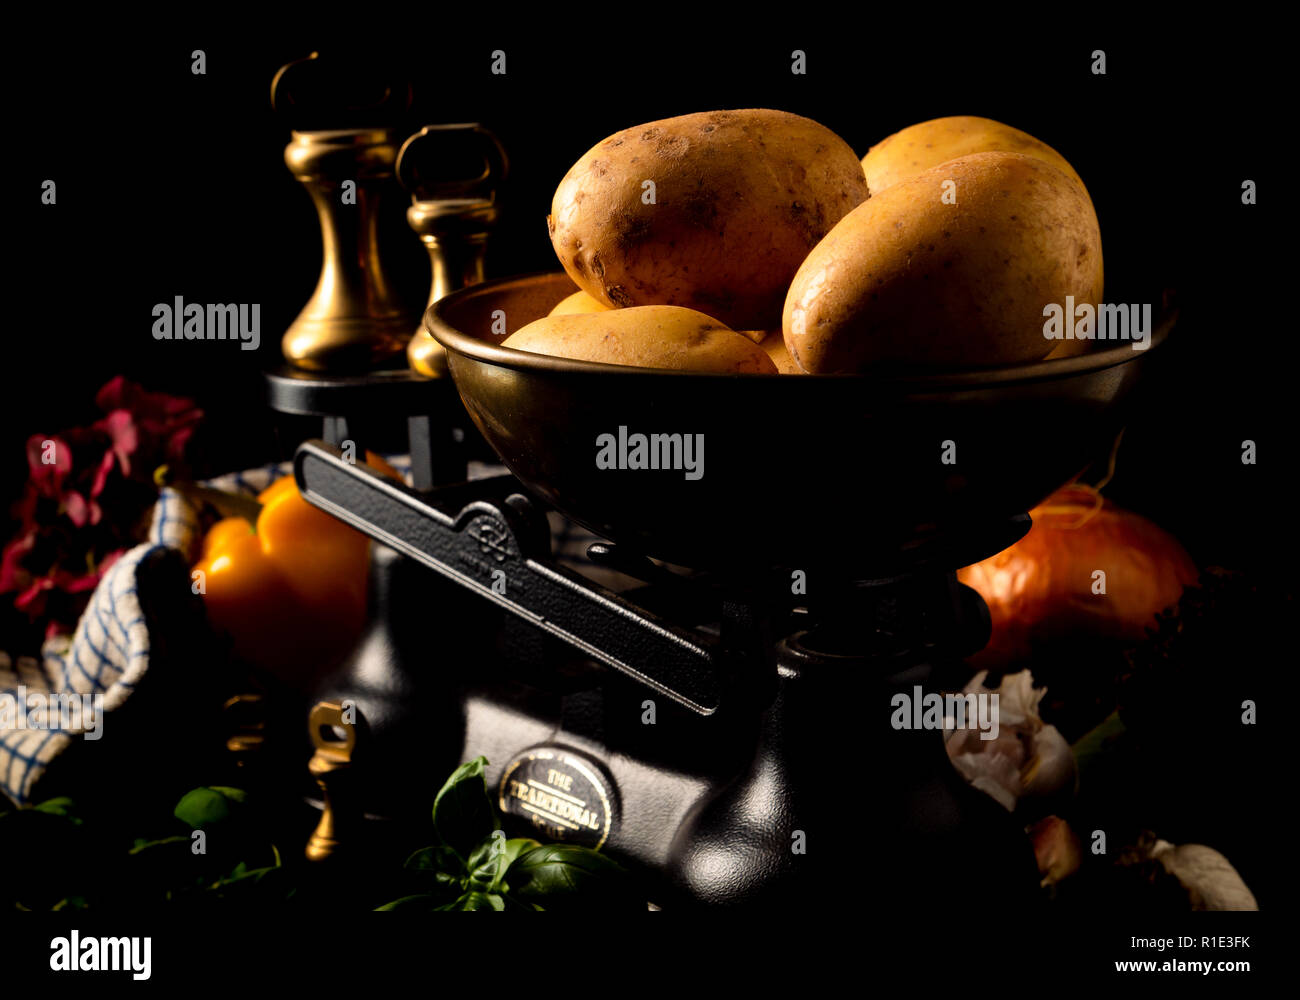 Old fashioned scales with potatoes Stock Photo